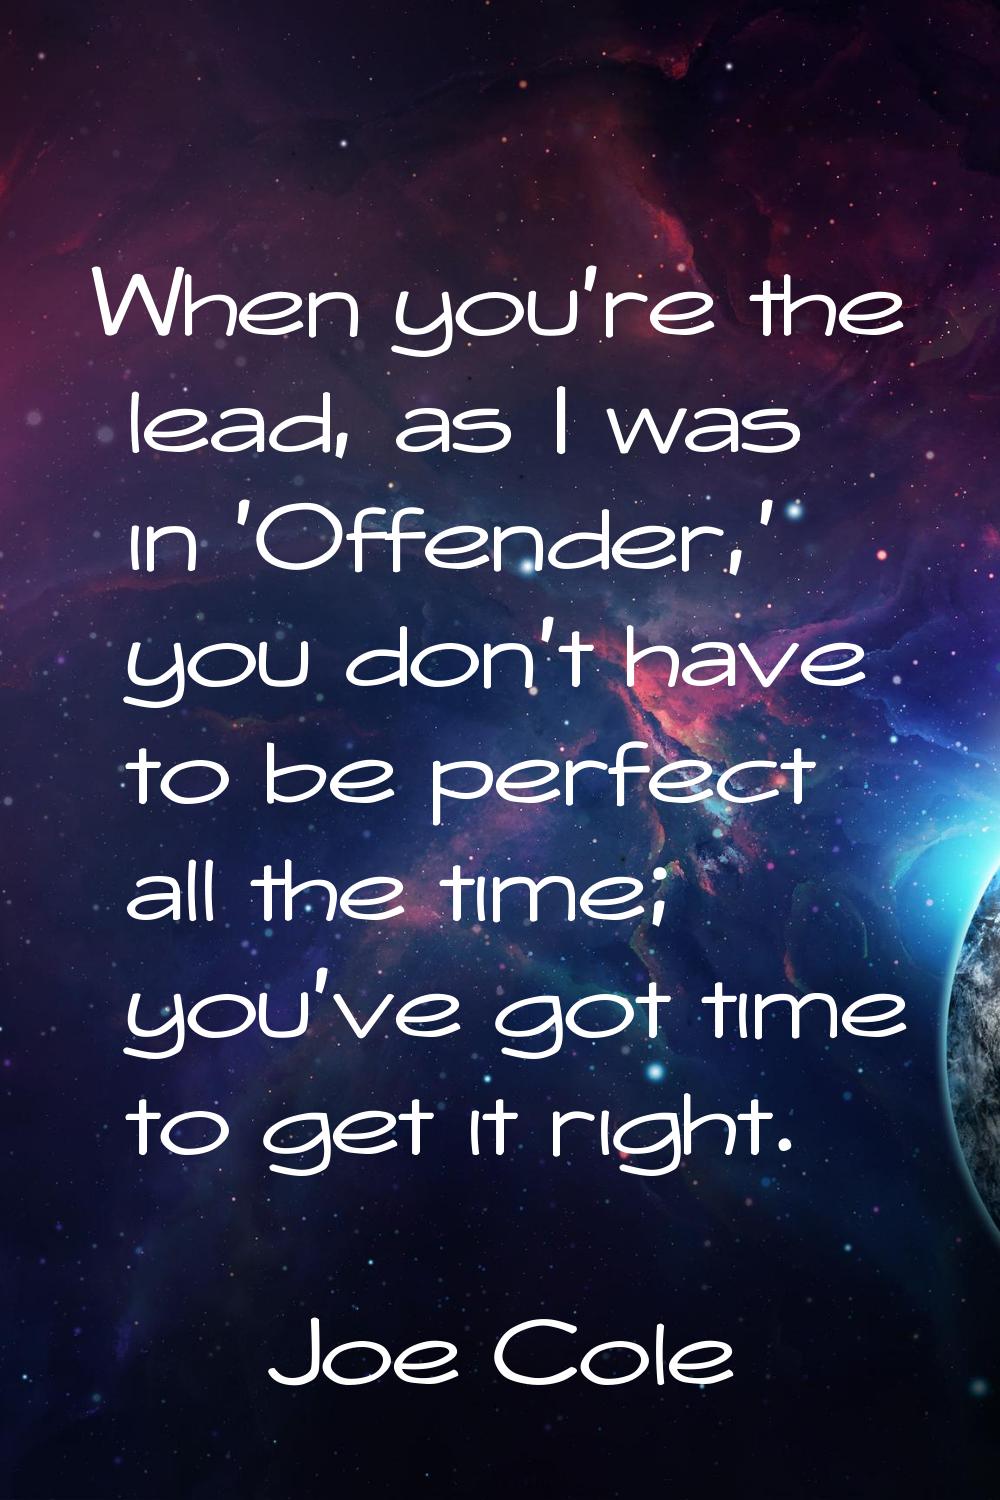 When you're the lead, as I was in 'Offender,' you don't have to be perfect all the time; you've got